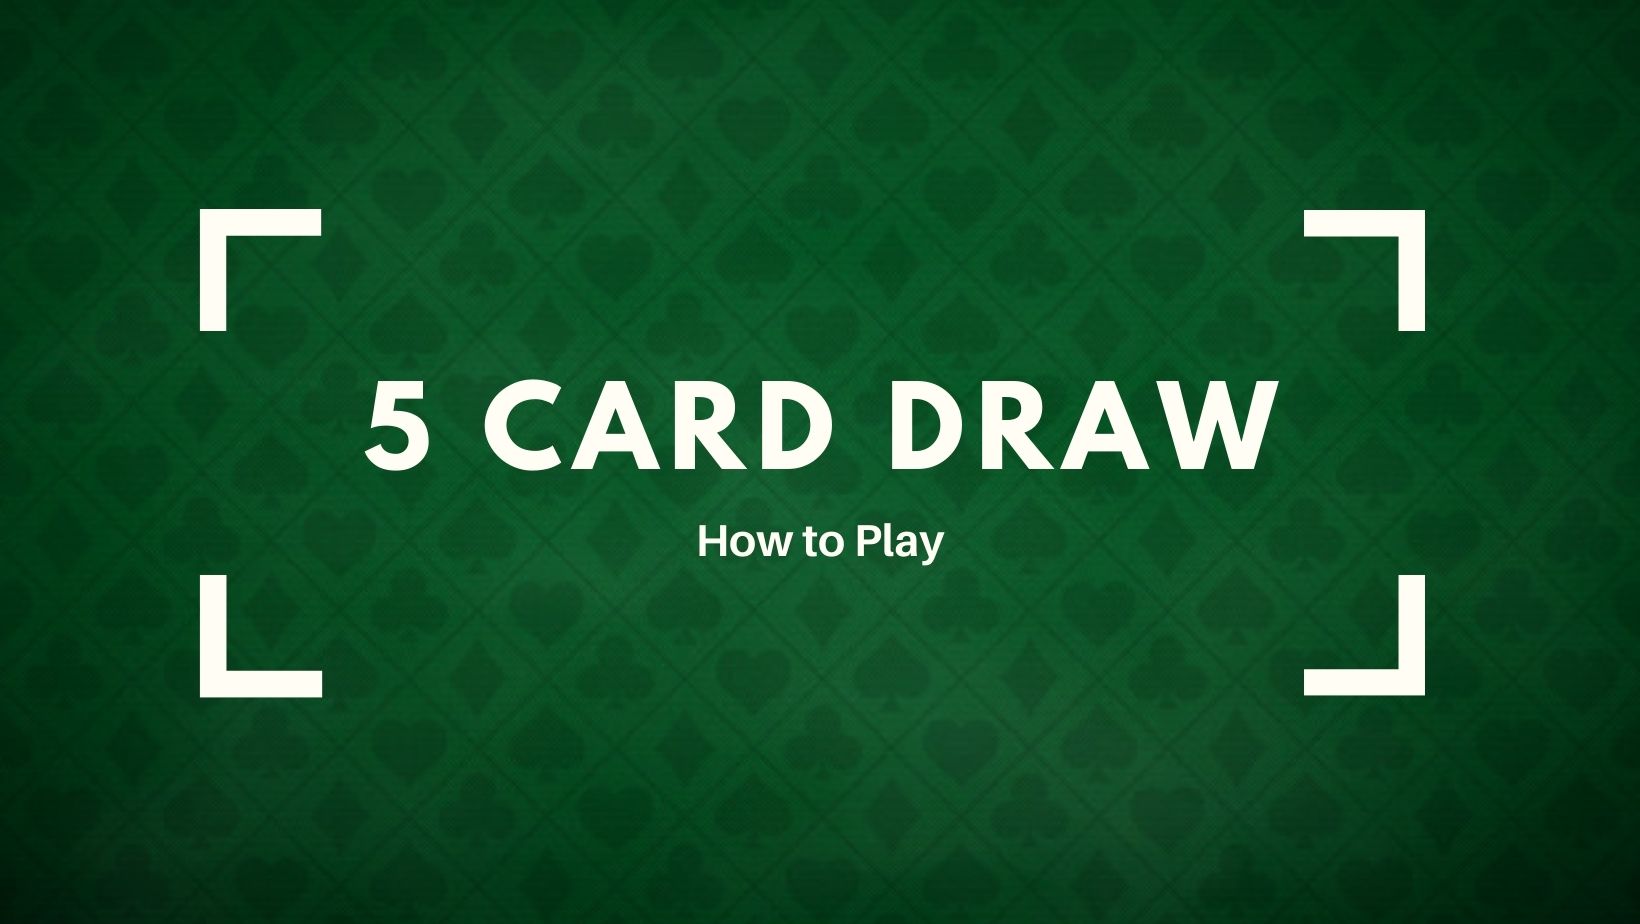 5 card draw early position strategy